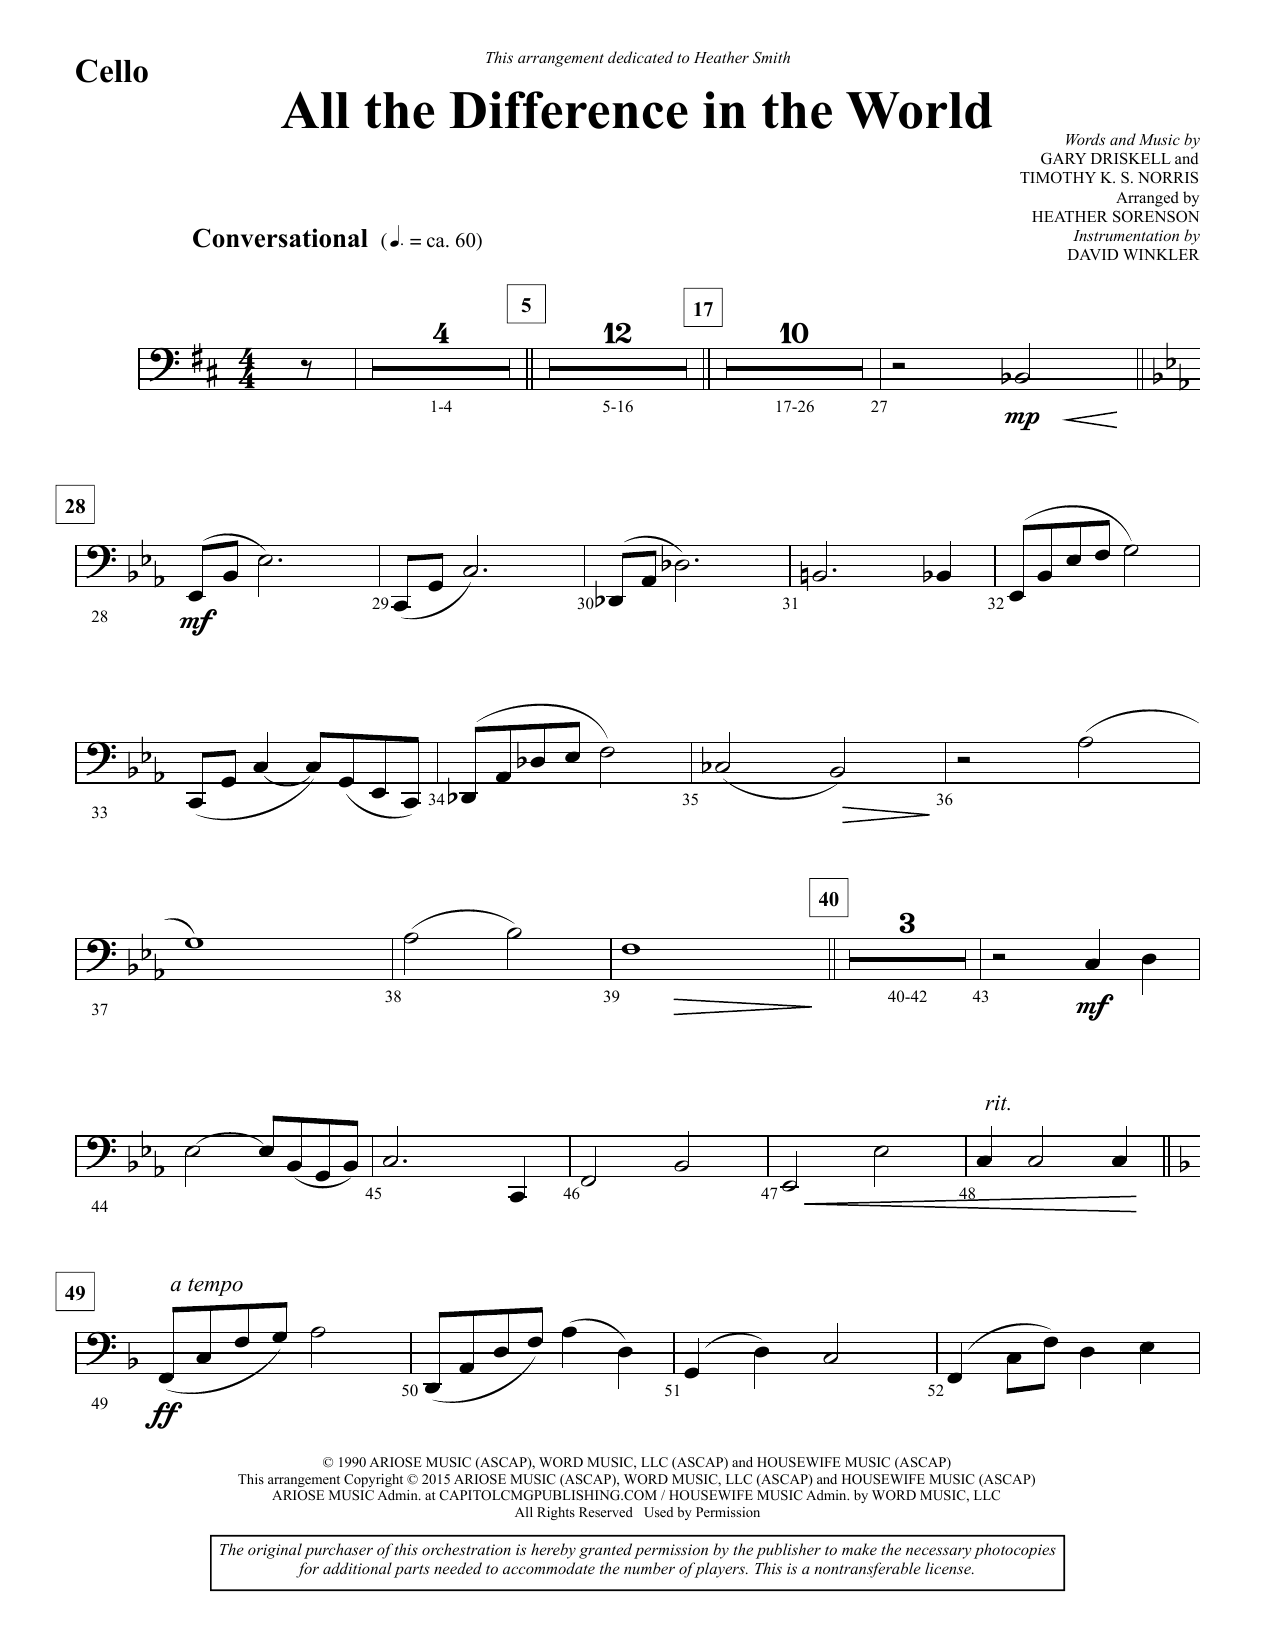 Heather Sorenson All the Difference in the World - Cello sheet music notes and chords. Download Printable PDF.